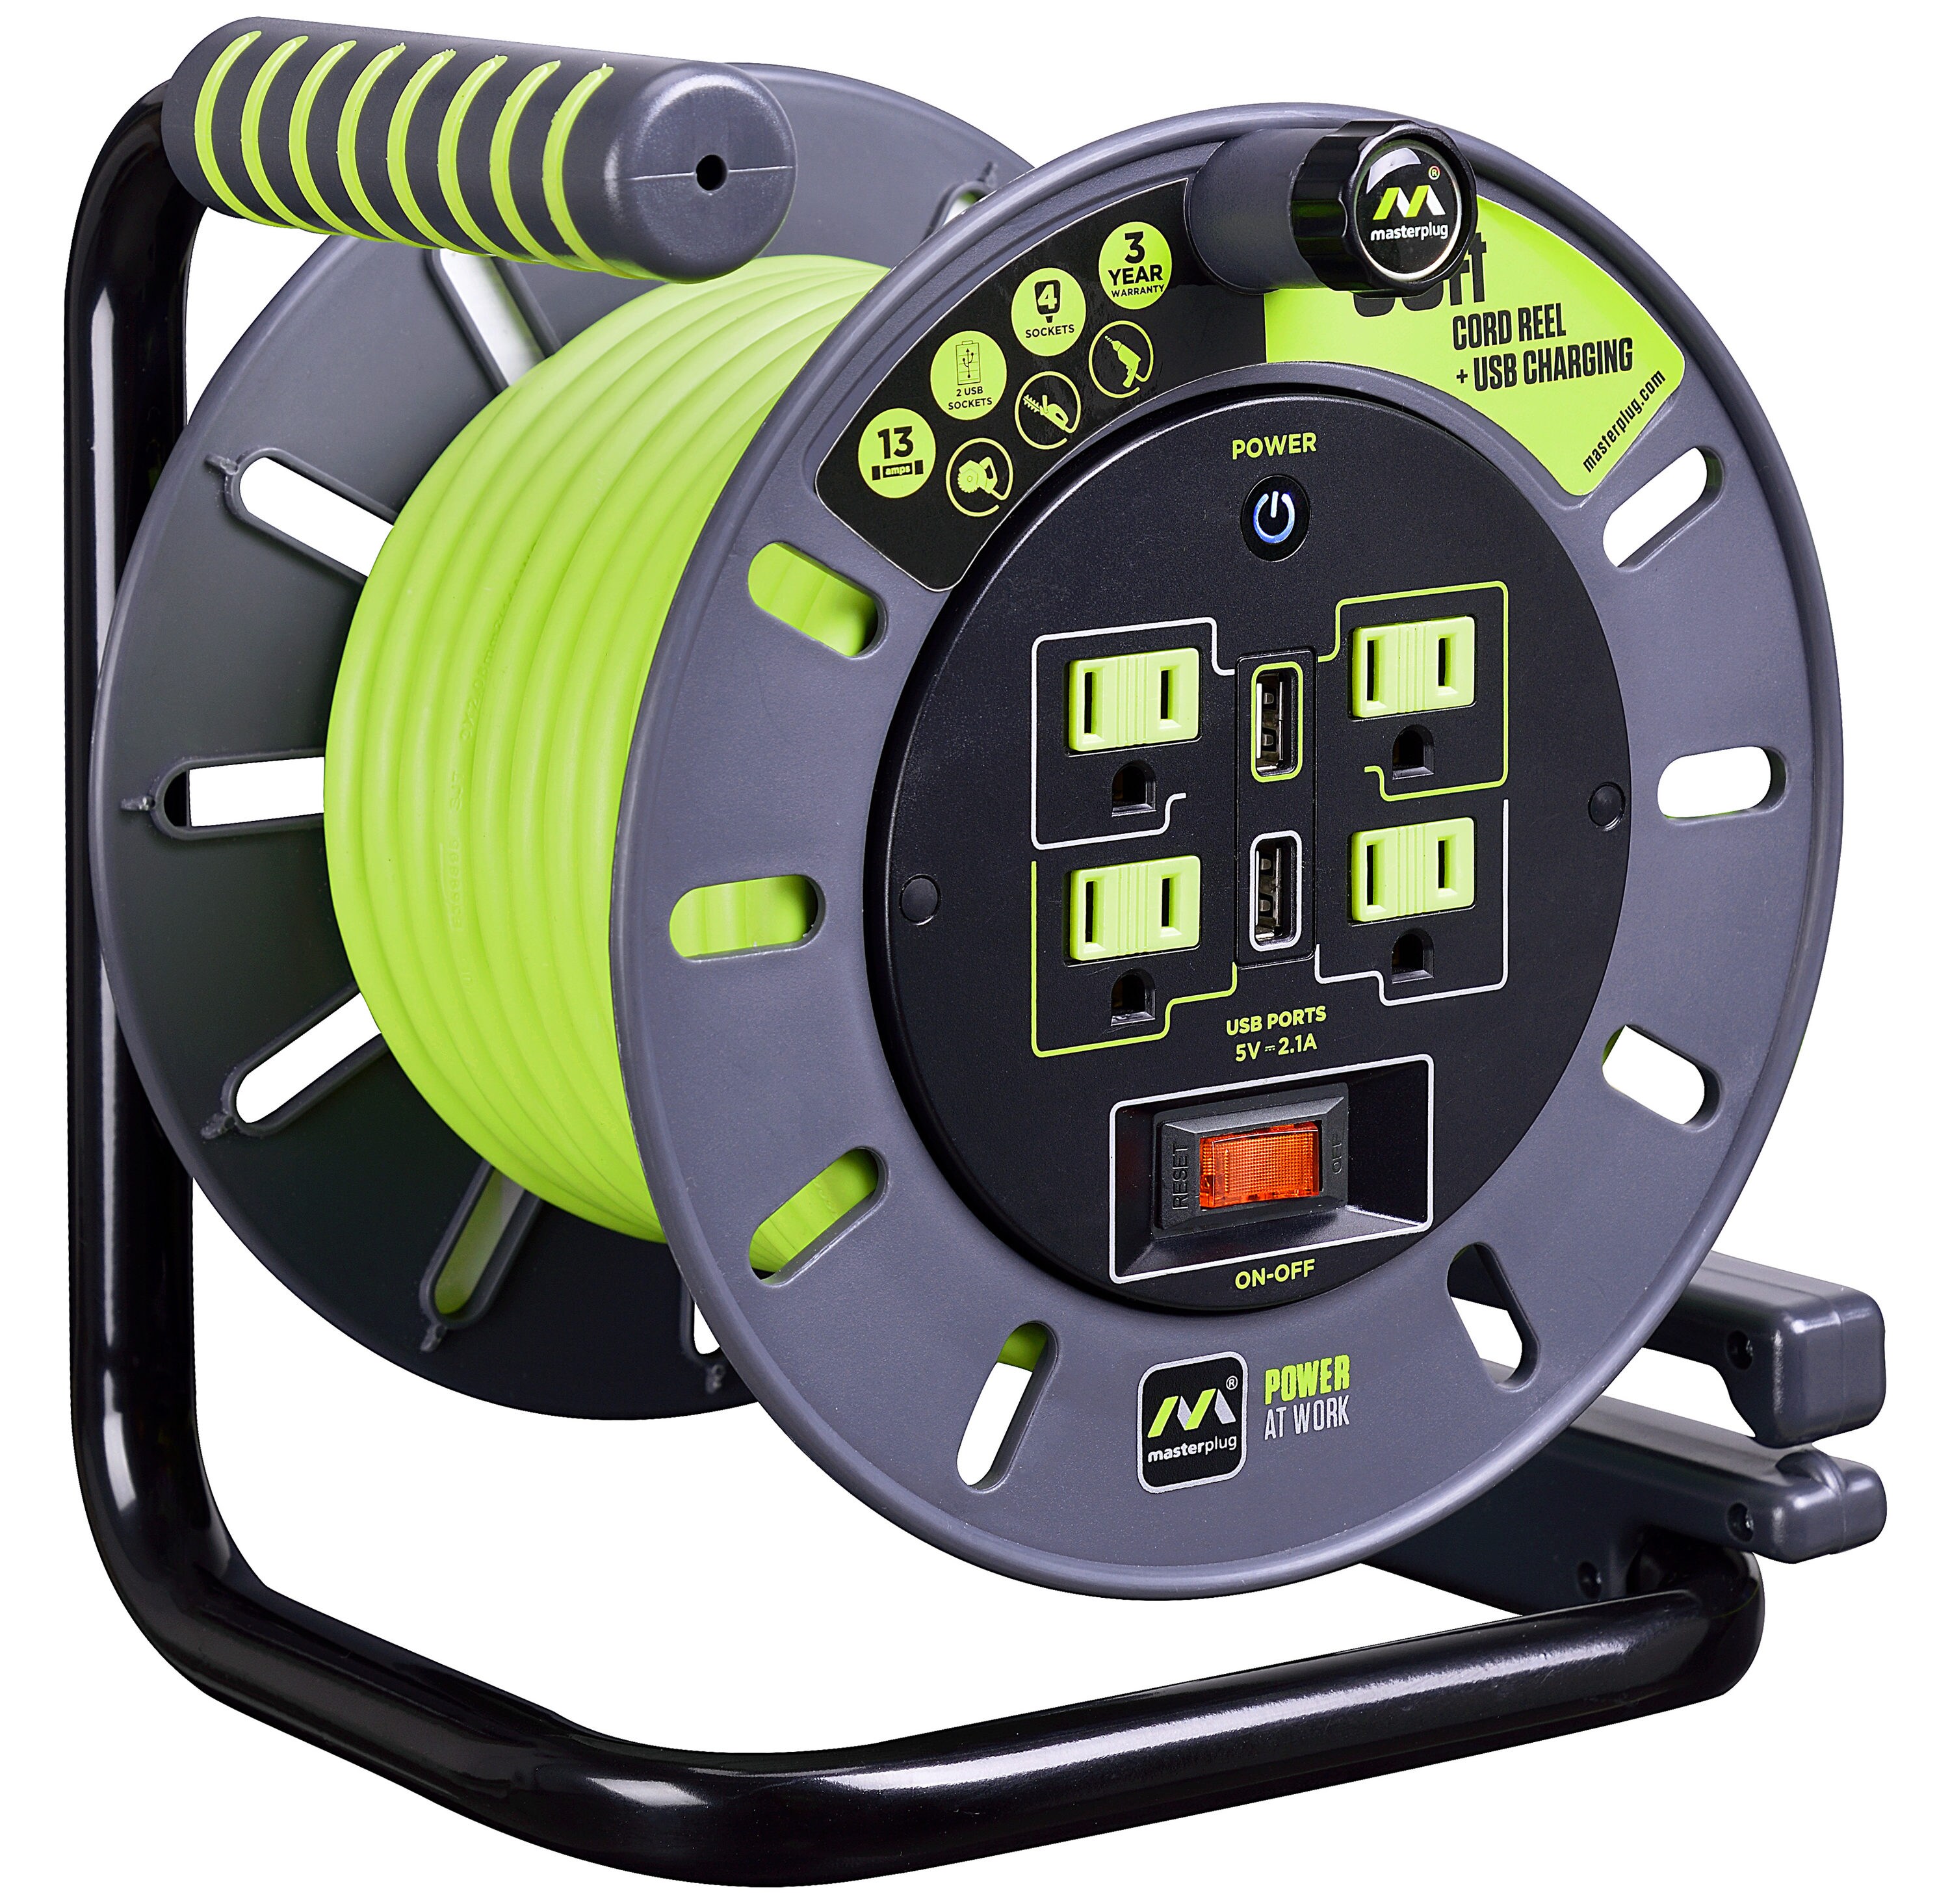 Extension cord reel Electrical at